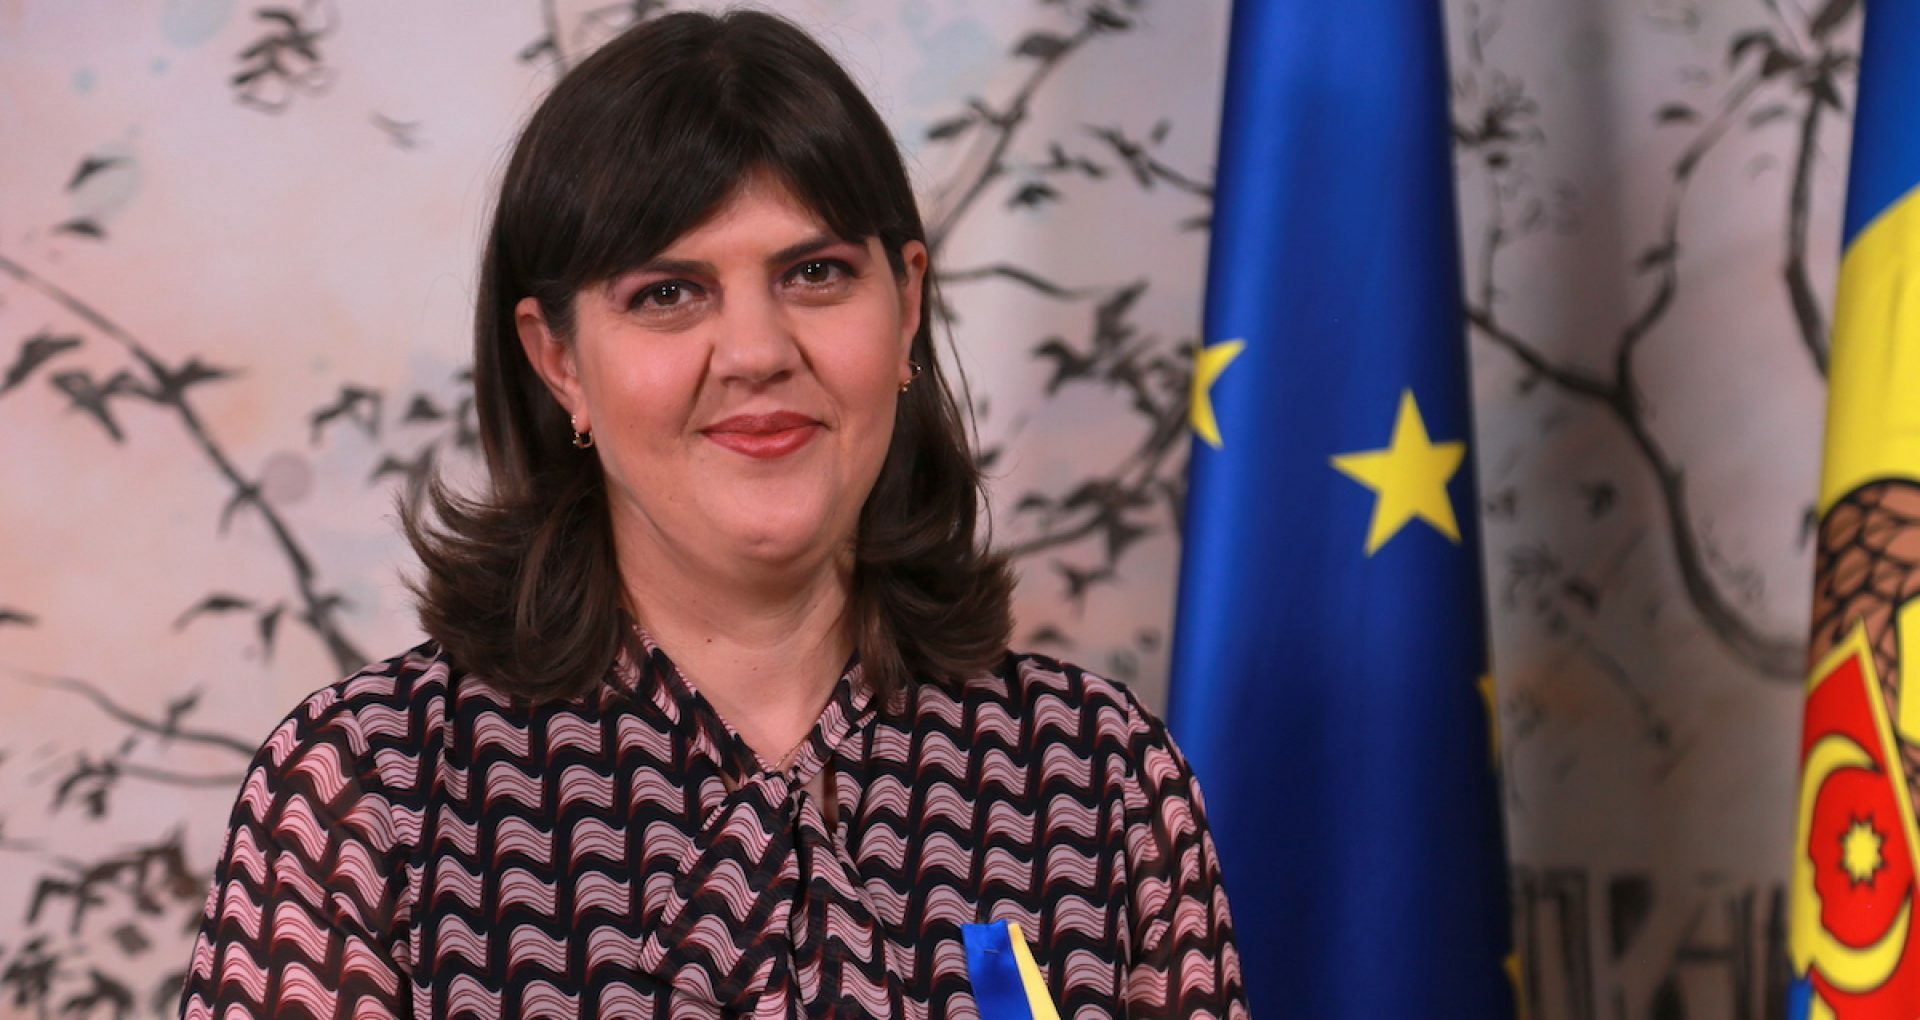 Exclusive interview with Laura Codruța Kövesi: “It’s not just important to put criminals in jail, it’s important to take away their assets and to recover the damages and everything they have illegally acquired”. INTERVIEW with the head of the European Public Prosecutor’s Office